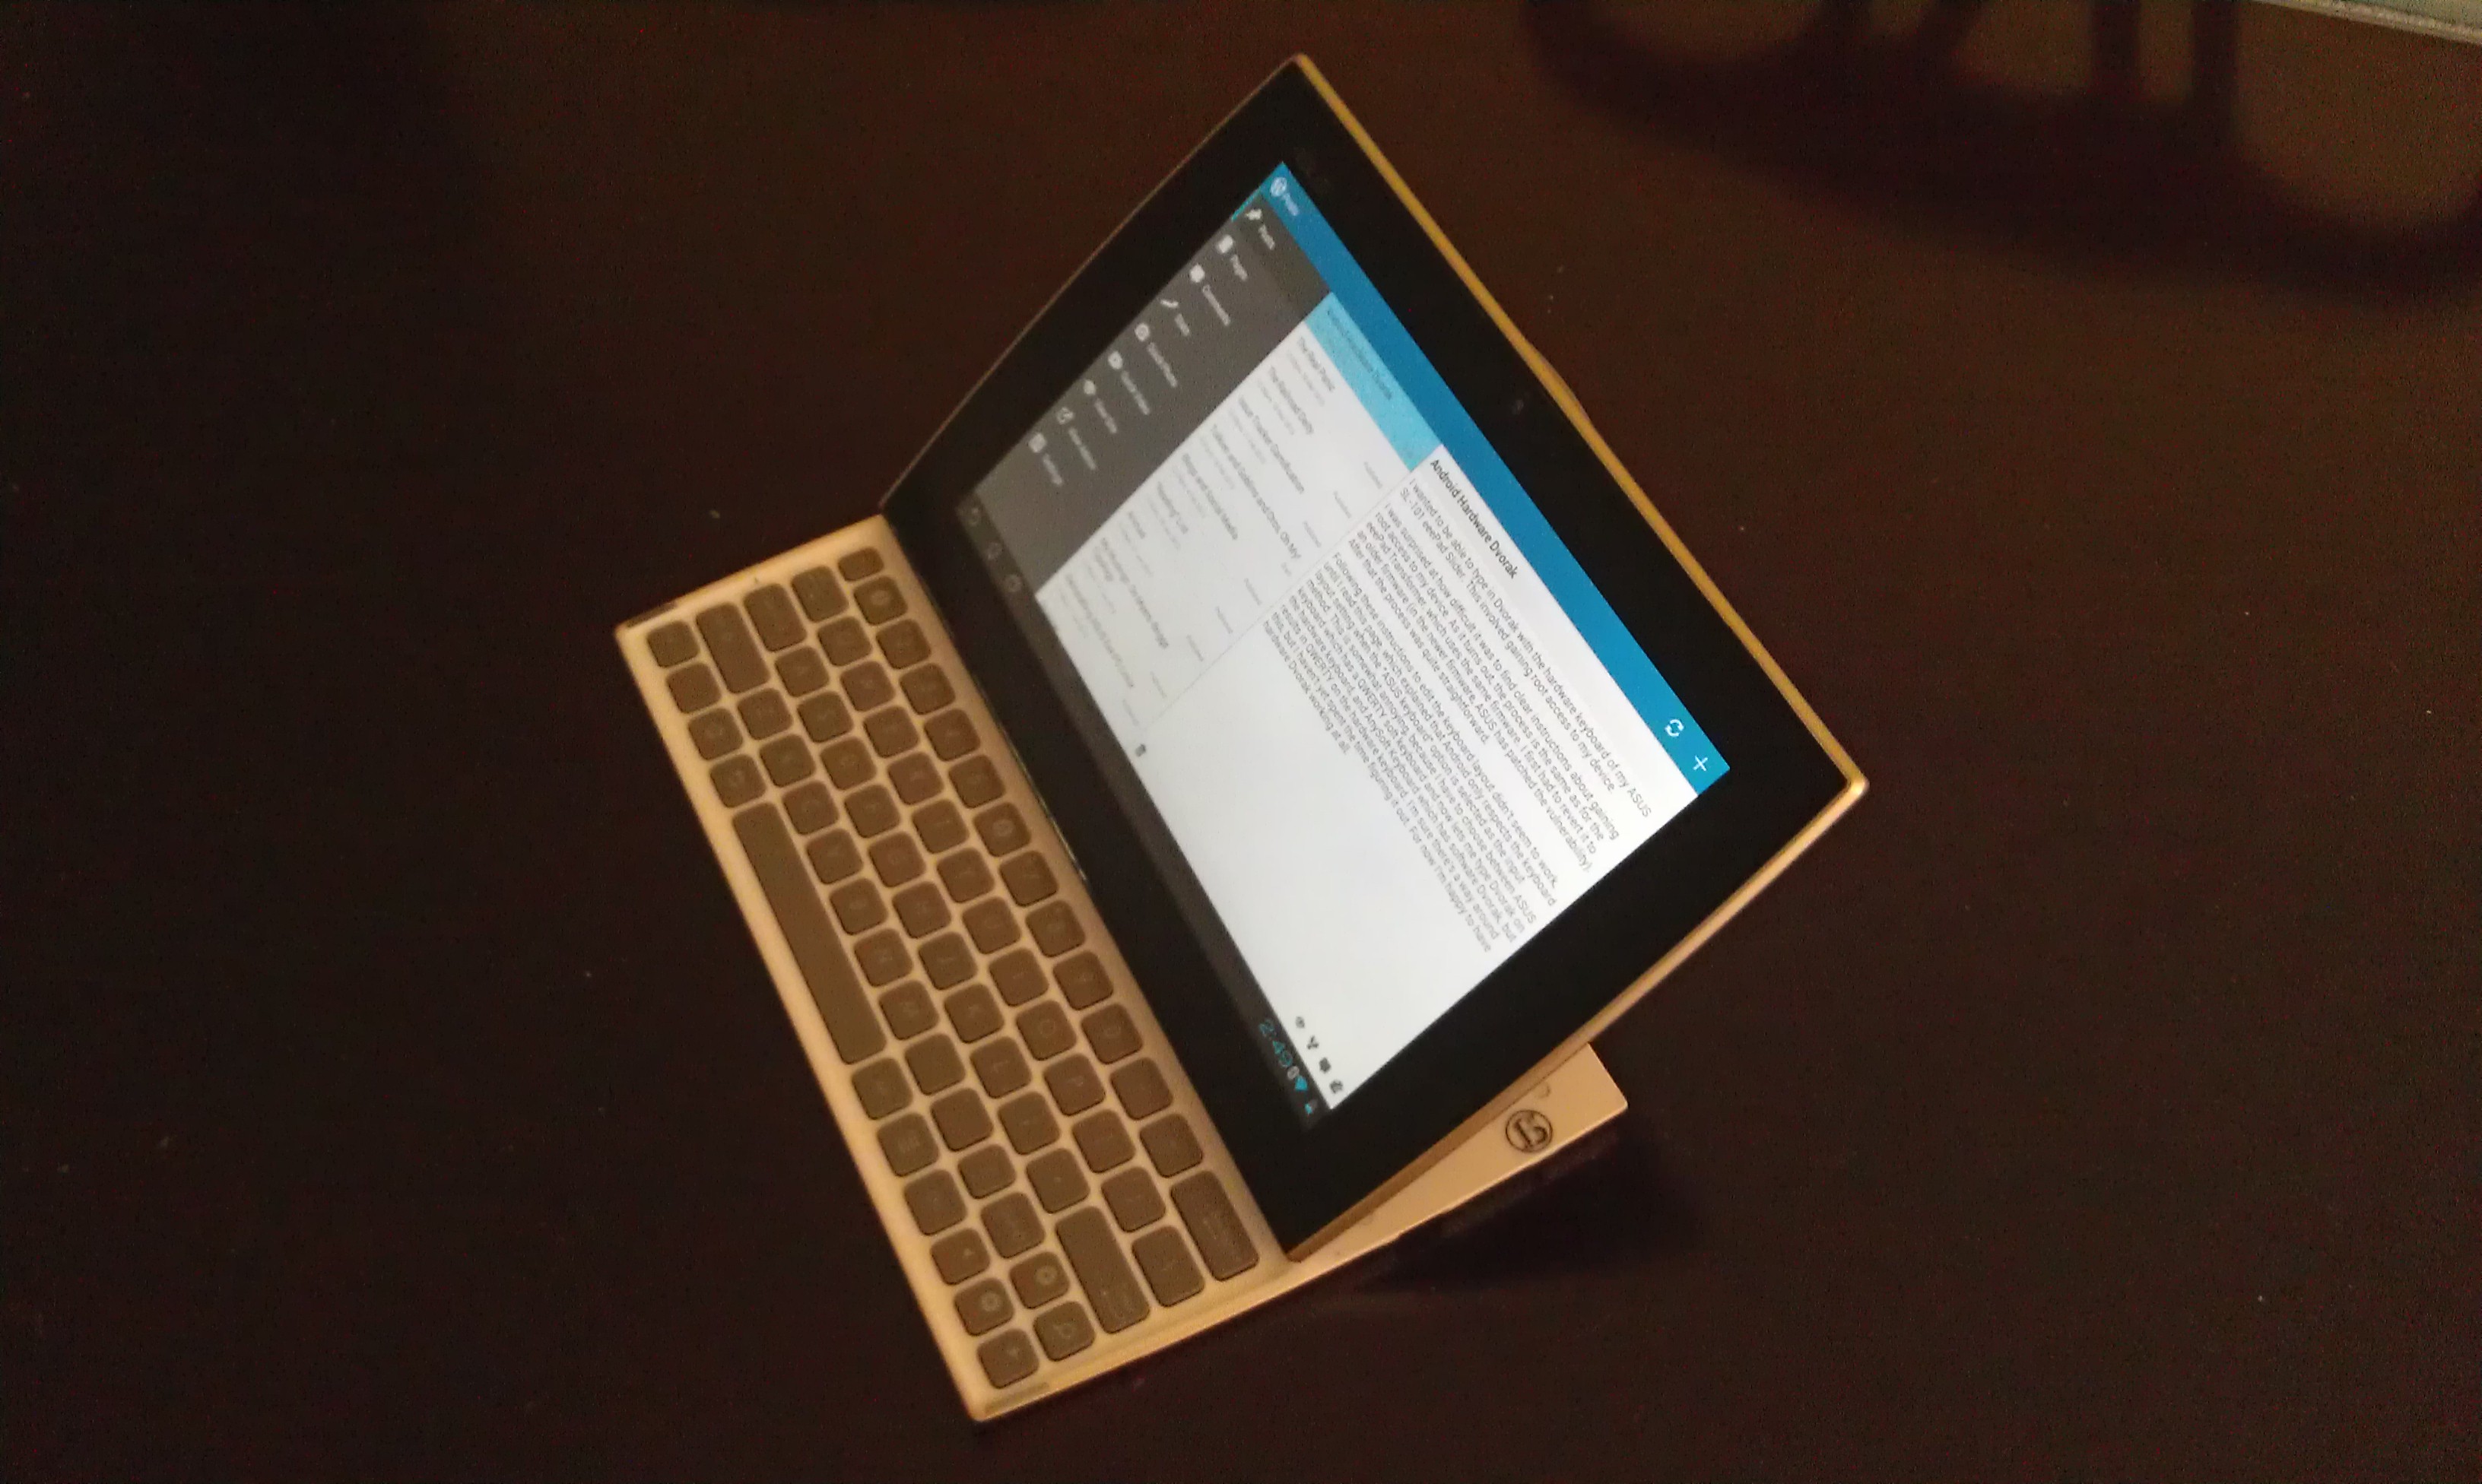 The eeePad slider is an Android tablet with a sliding hardware keyboard